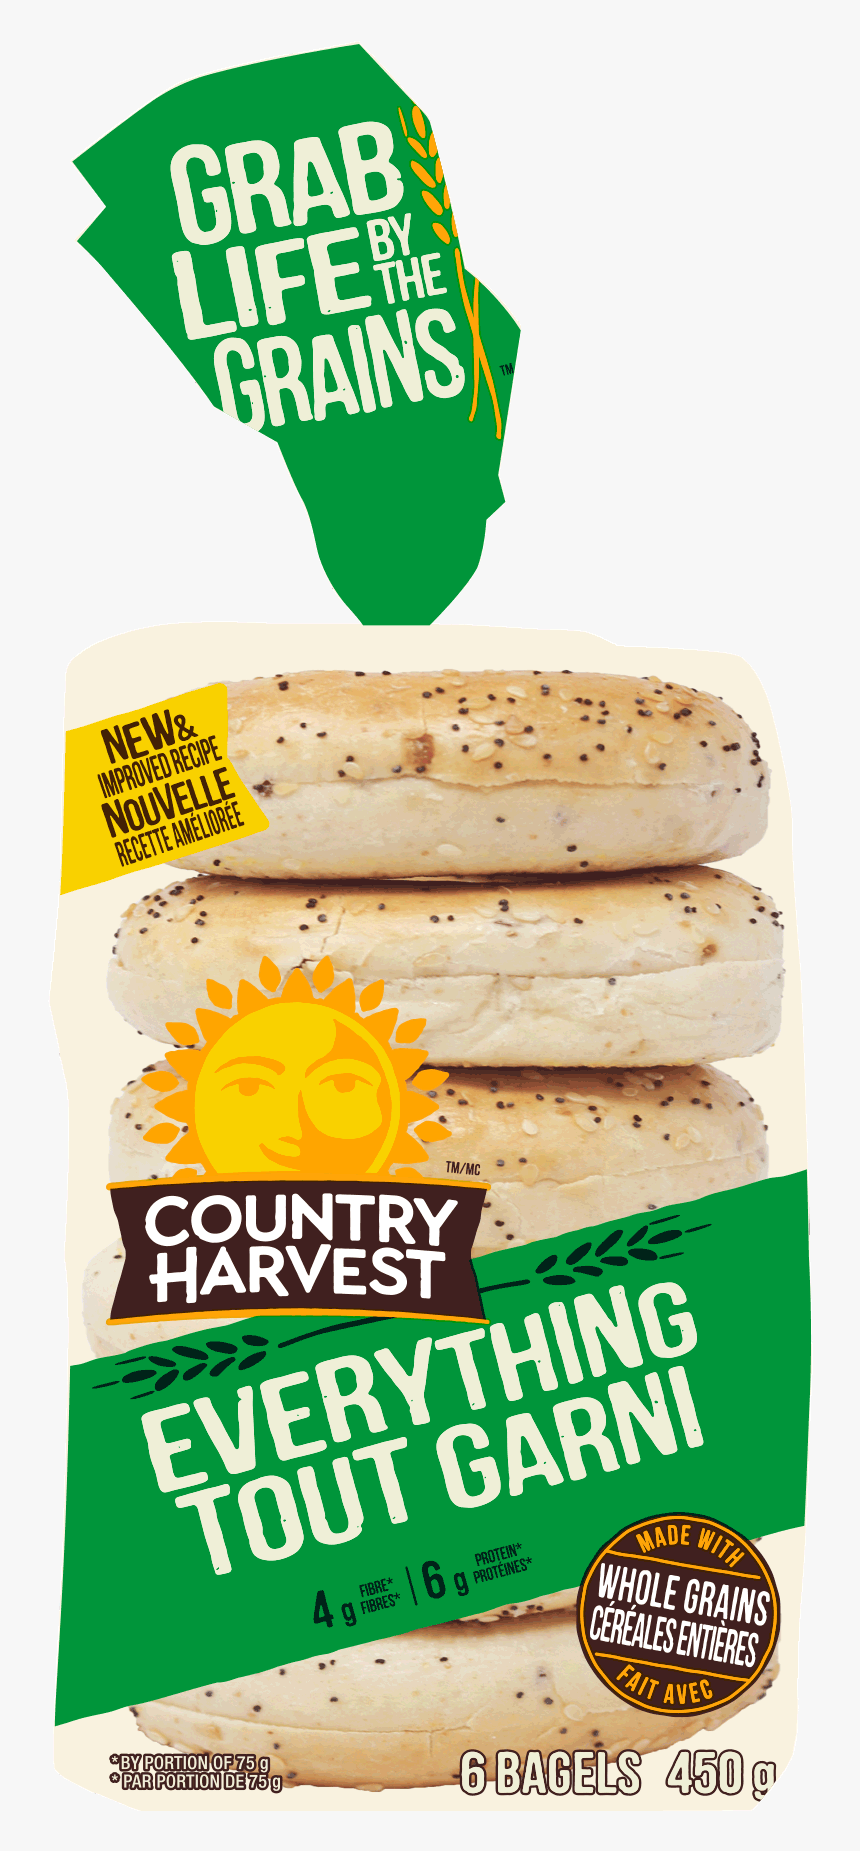 Country Harvest Everything Bagel Image - Country Harvest Bagels, HD Png Download, Free Download